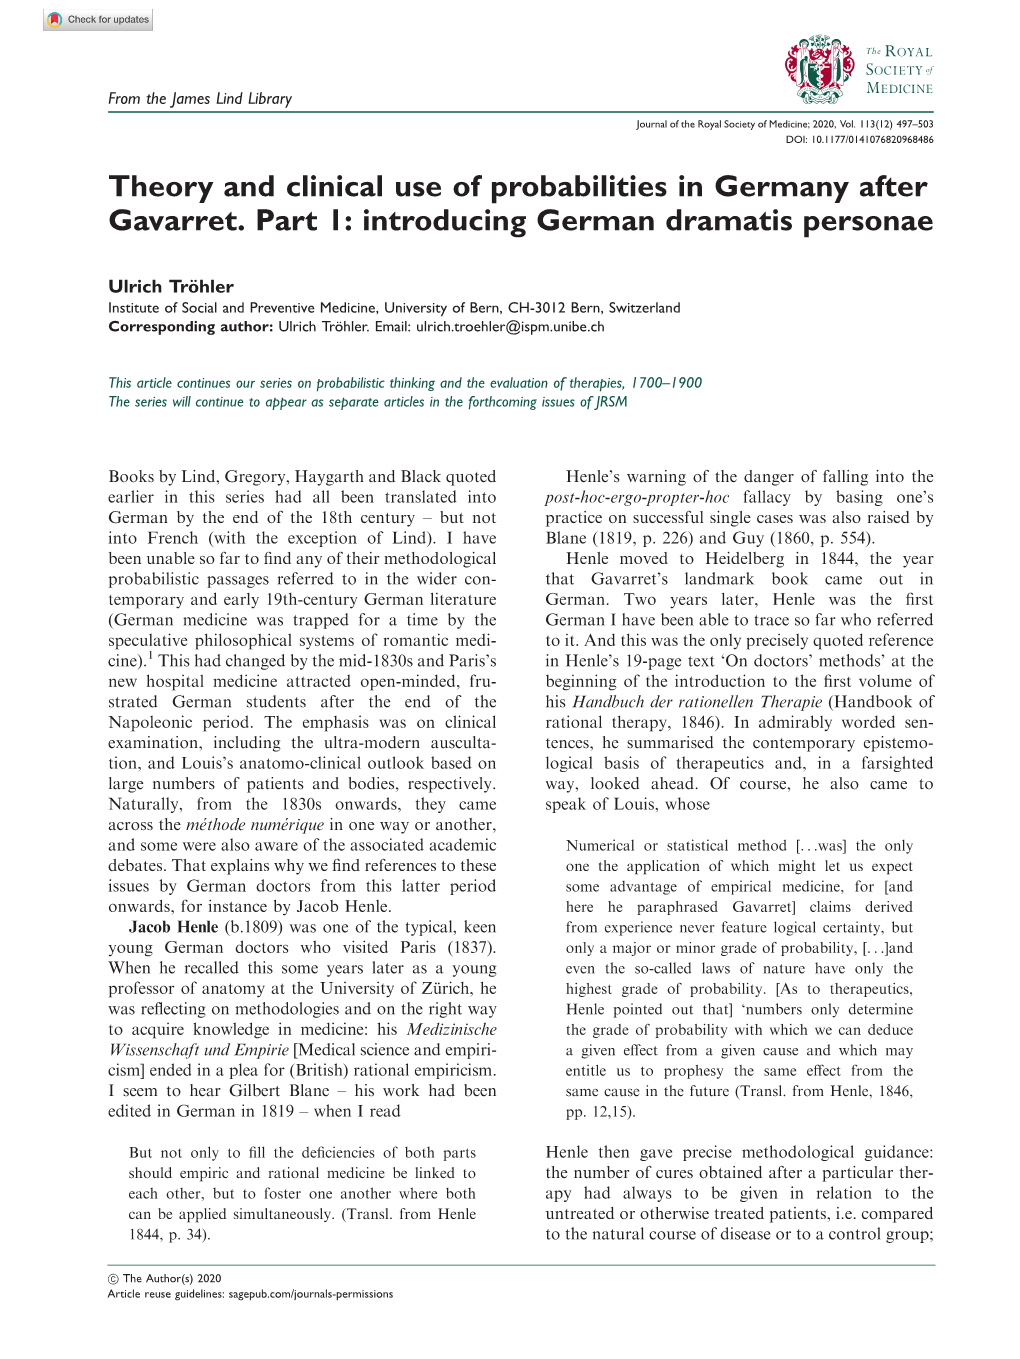 Theory and Clinical Use of Probabilities in Germany After Gavarret. Part 1: Introducing German Dramatis Personae